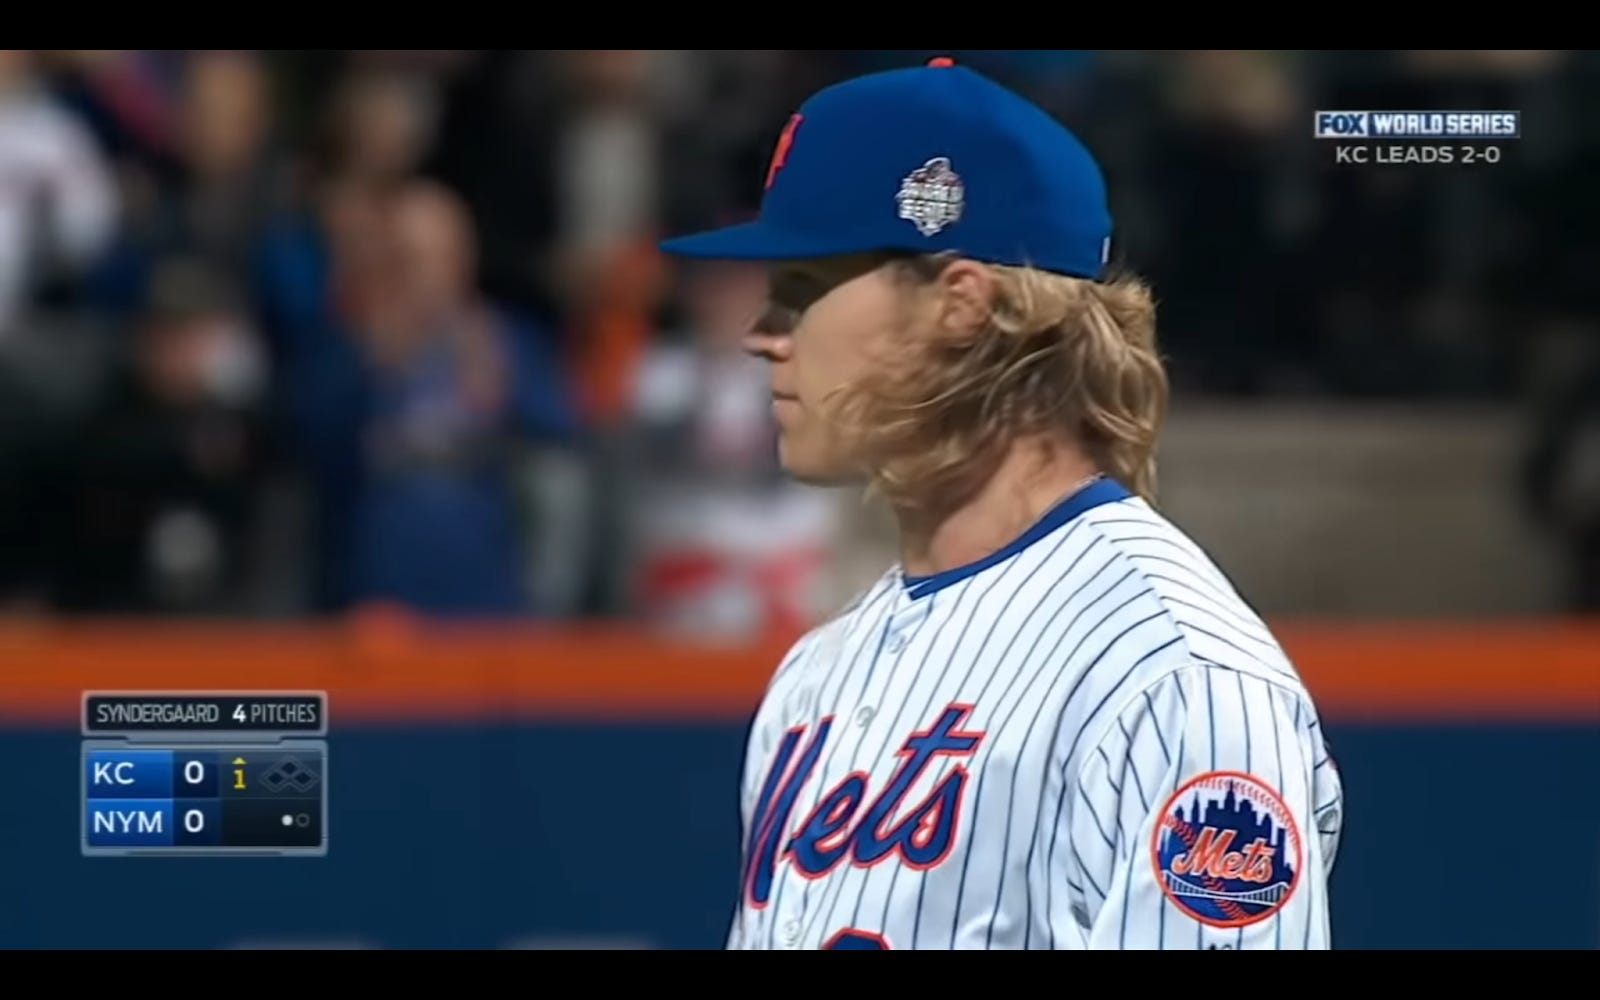 NY Mets fans may have a funny feeling seeing Noah Syndergaard vs